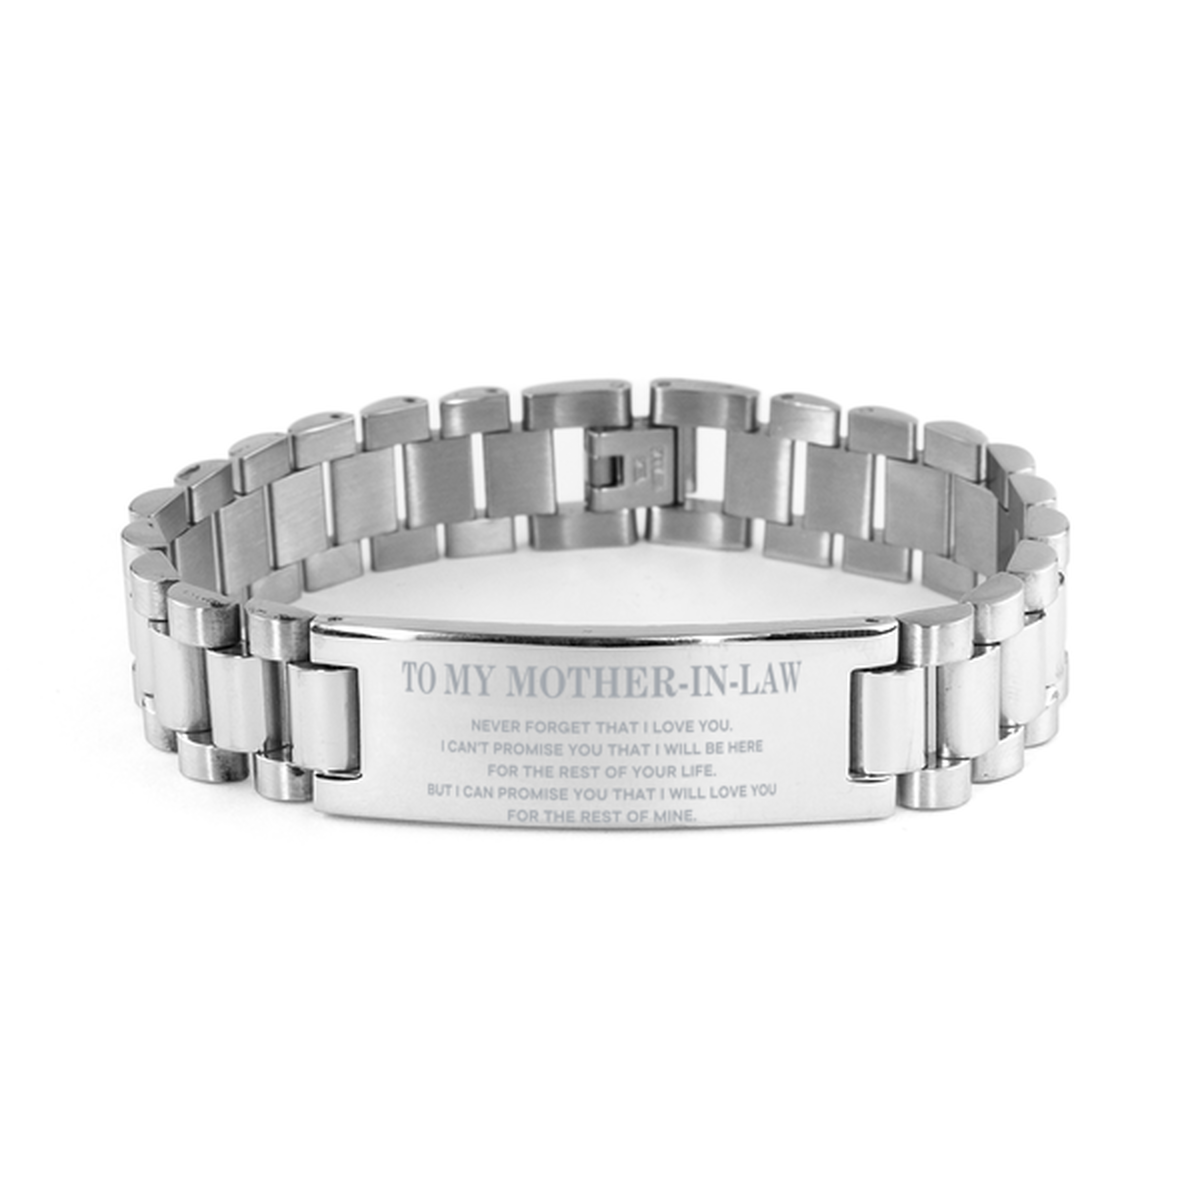 To My Mother-In-Law Gifts, I will love you for the rest of mine, Love Mother-In-Law Bracelet, Birthday Christmas Unique Ladder Stainless Steel Bracelet For Mother-In-Law